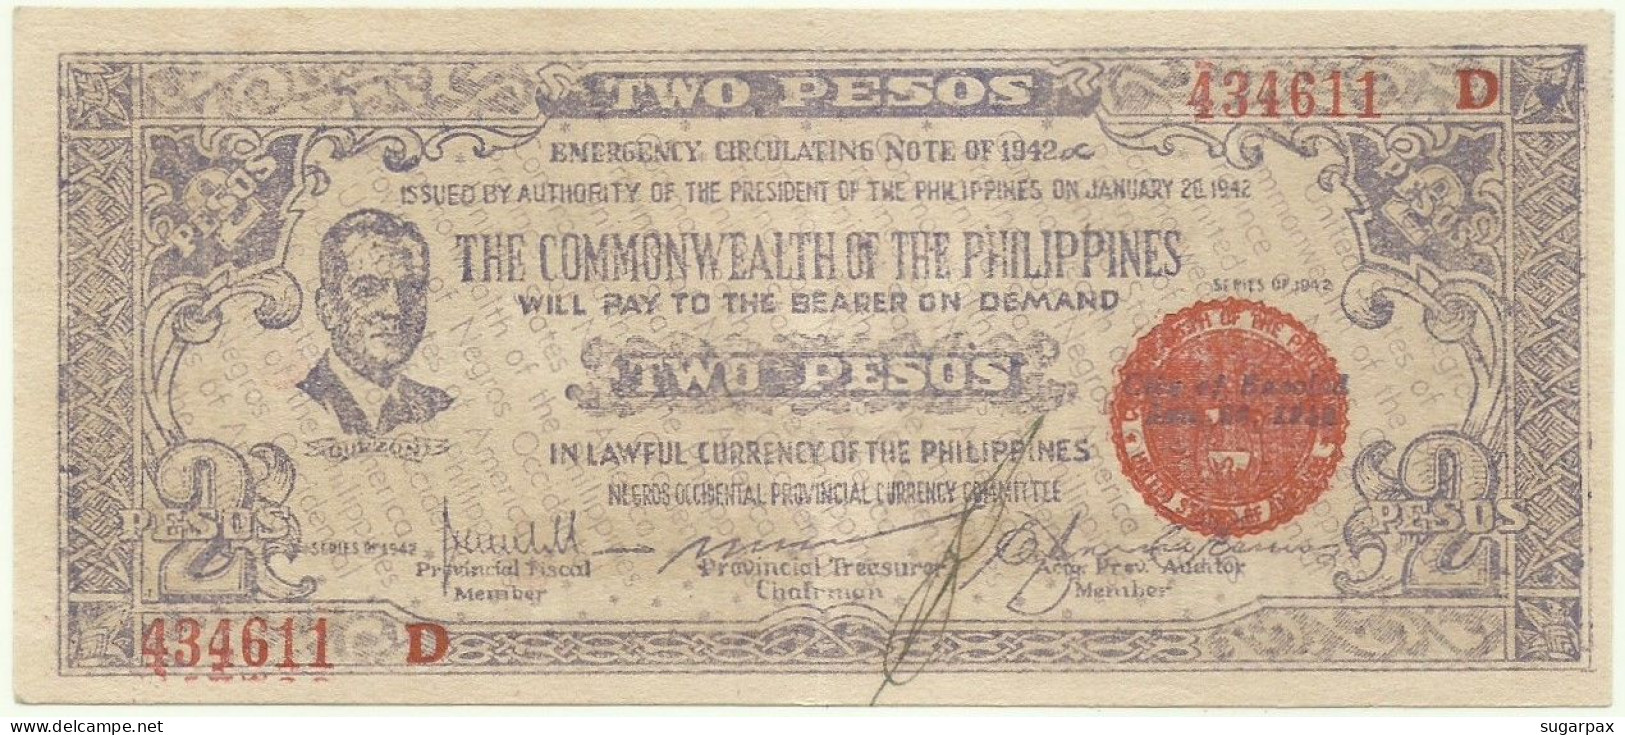 PHILIPPINES - 2 Pesos - 1942 - Pick S 647B - Serie D - NEGROS Occidental Provincial Currency Committee - Philippines